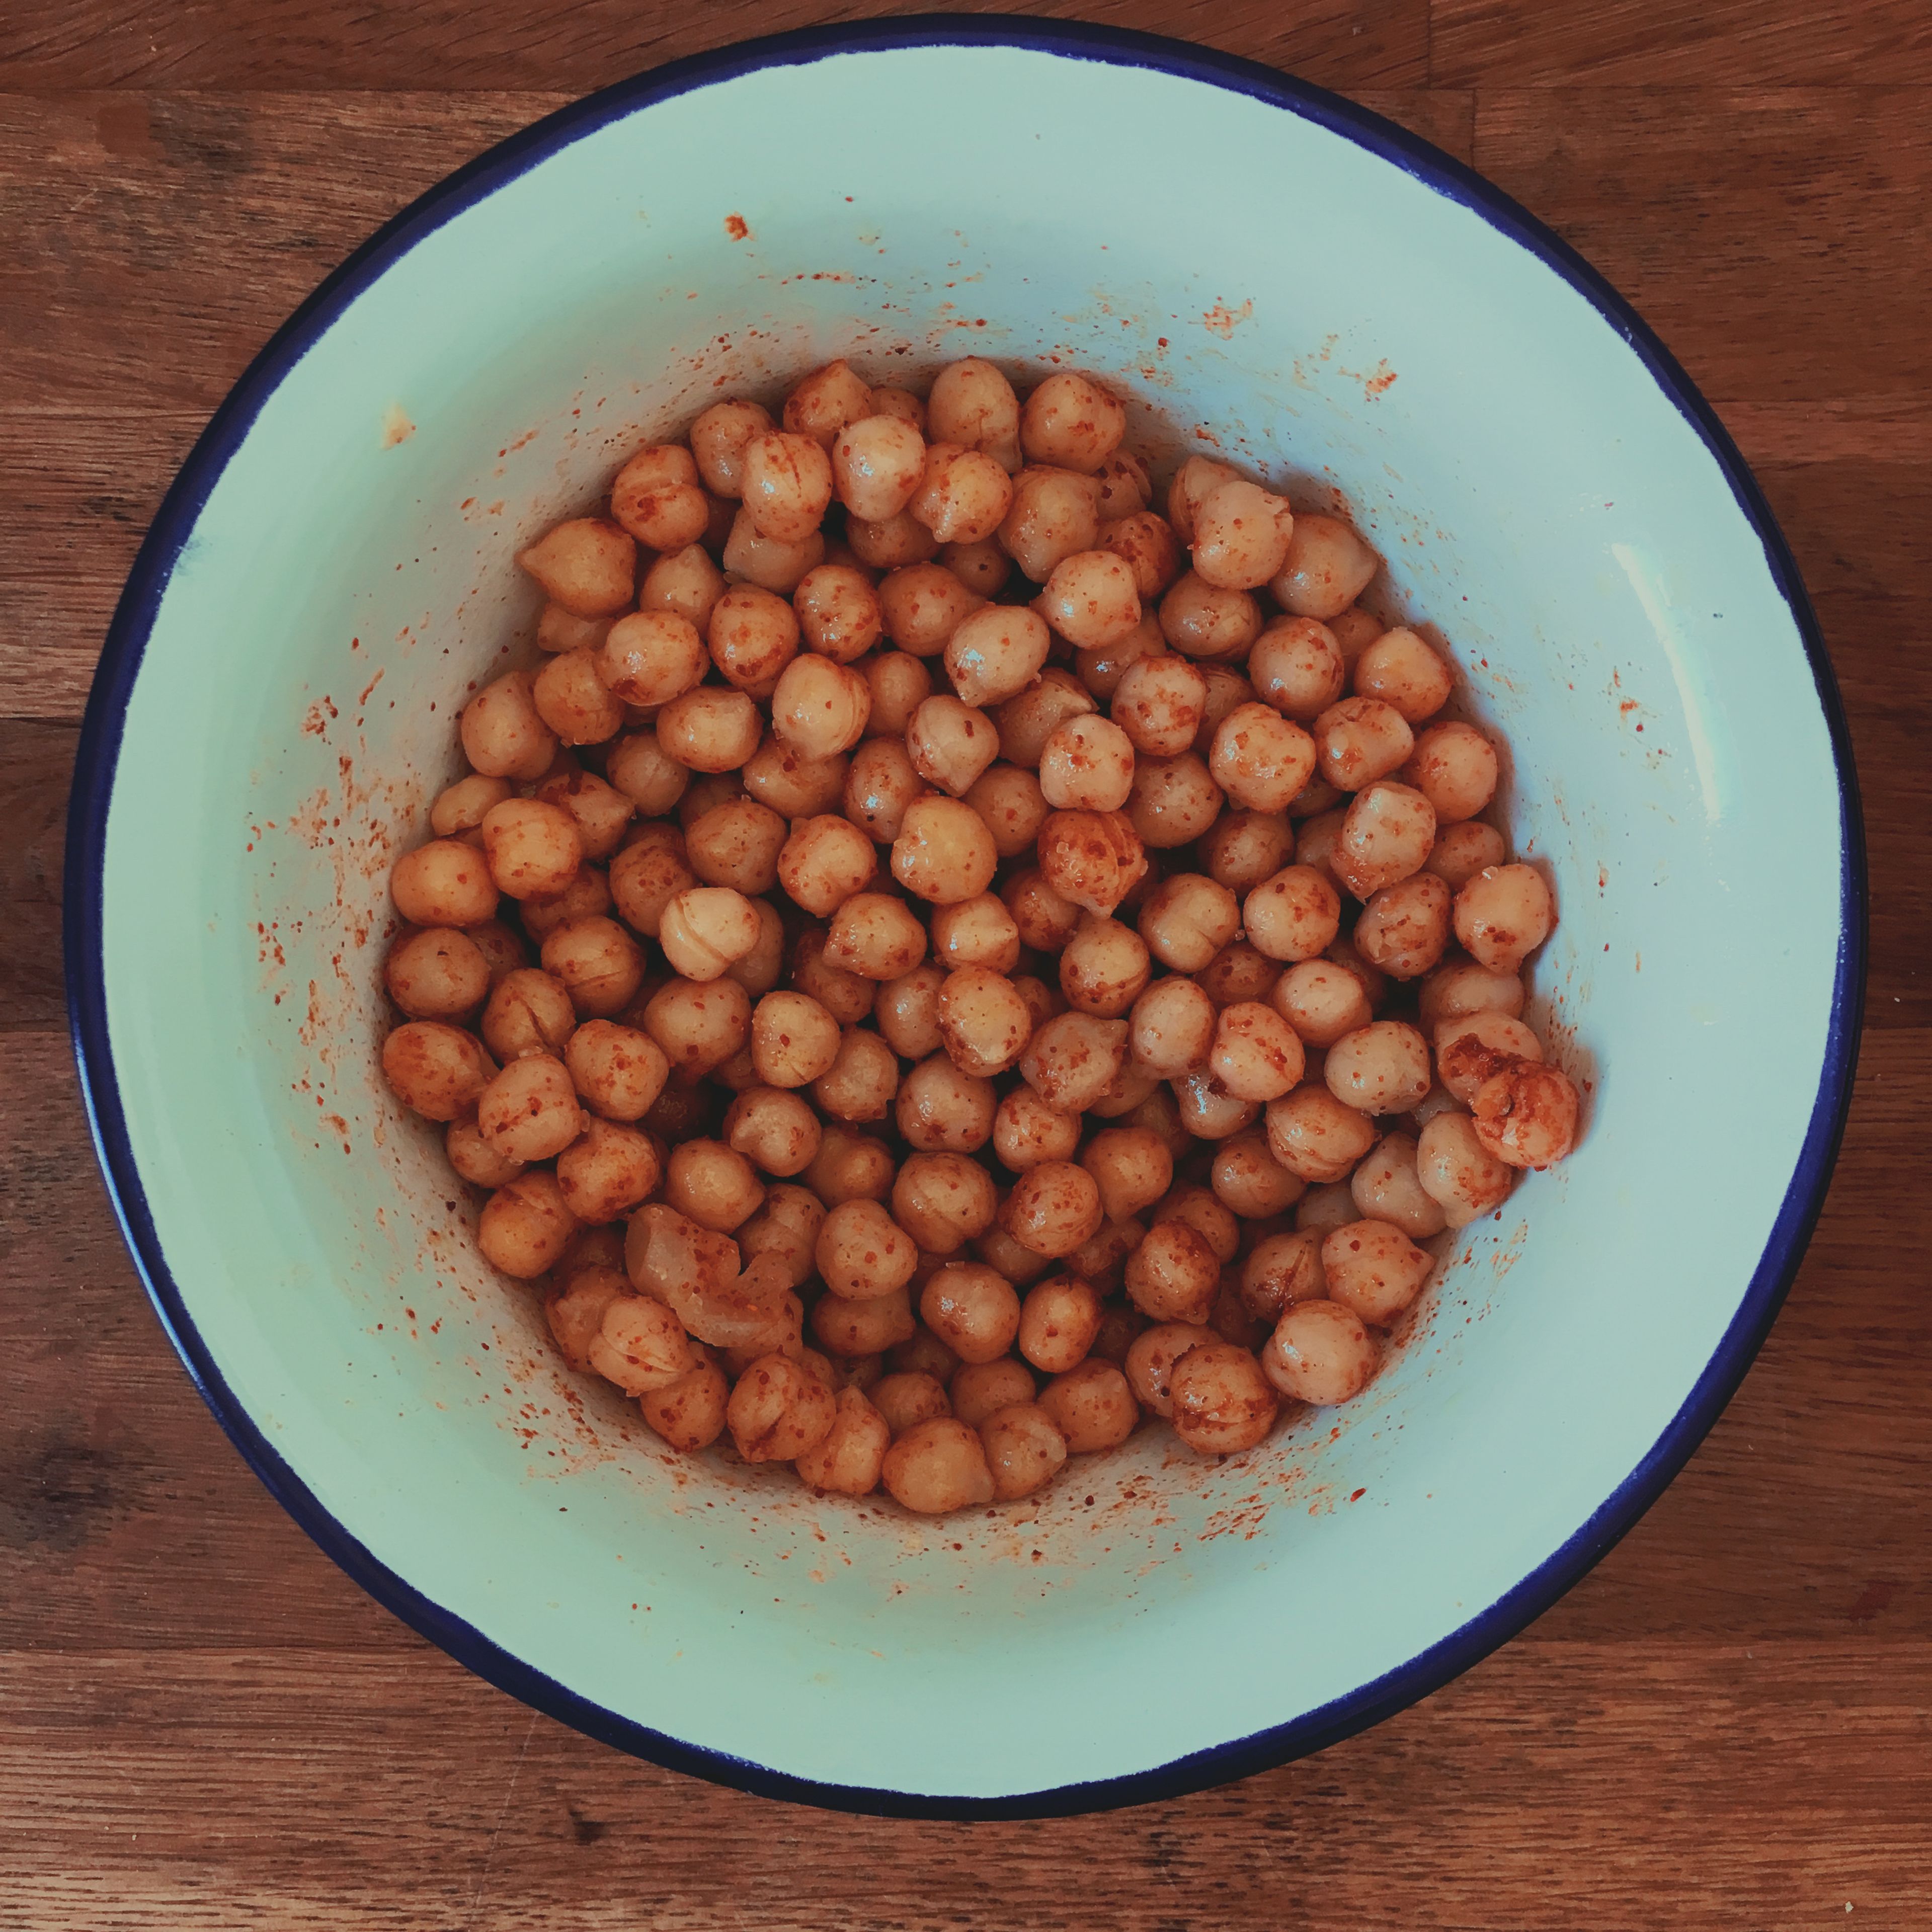 Drain chickpeas and dry them with a kitchen towel. Mix chickpeas with olive oil, sweet paprika powder, cayenne pepper, salt, and pepper. Transfer to a baking sheet and bake at 180°C/355°F for approx. 25 min., or until crispy. During the last 5 min. of baking, add pita breads to the oven. Alternatively, you can toast them.